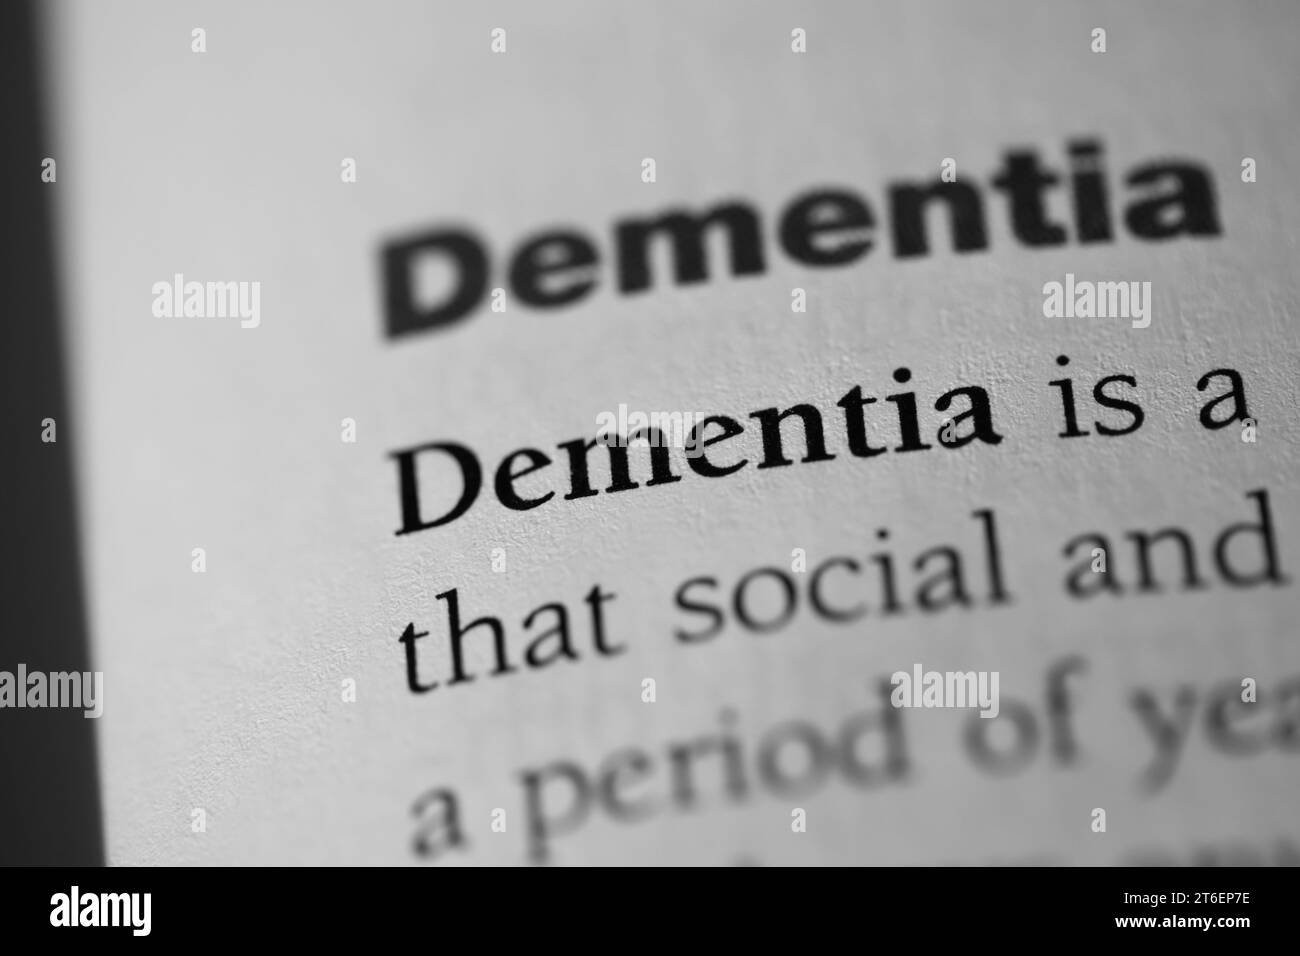 A close-up of the psychological or mental disorder term 'Dementia' written in black on a white paper Stock Photo